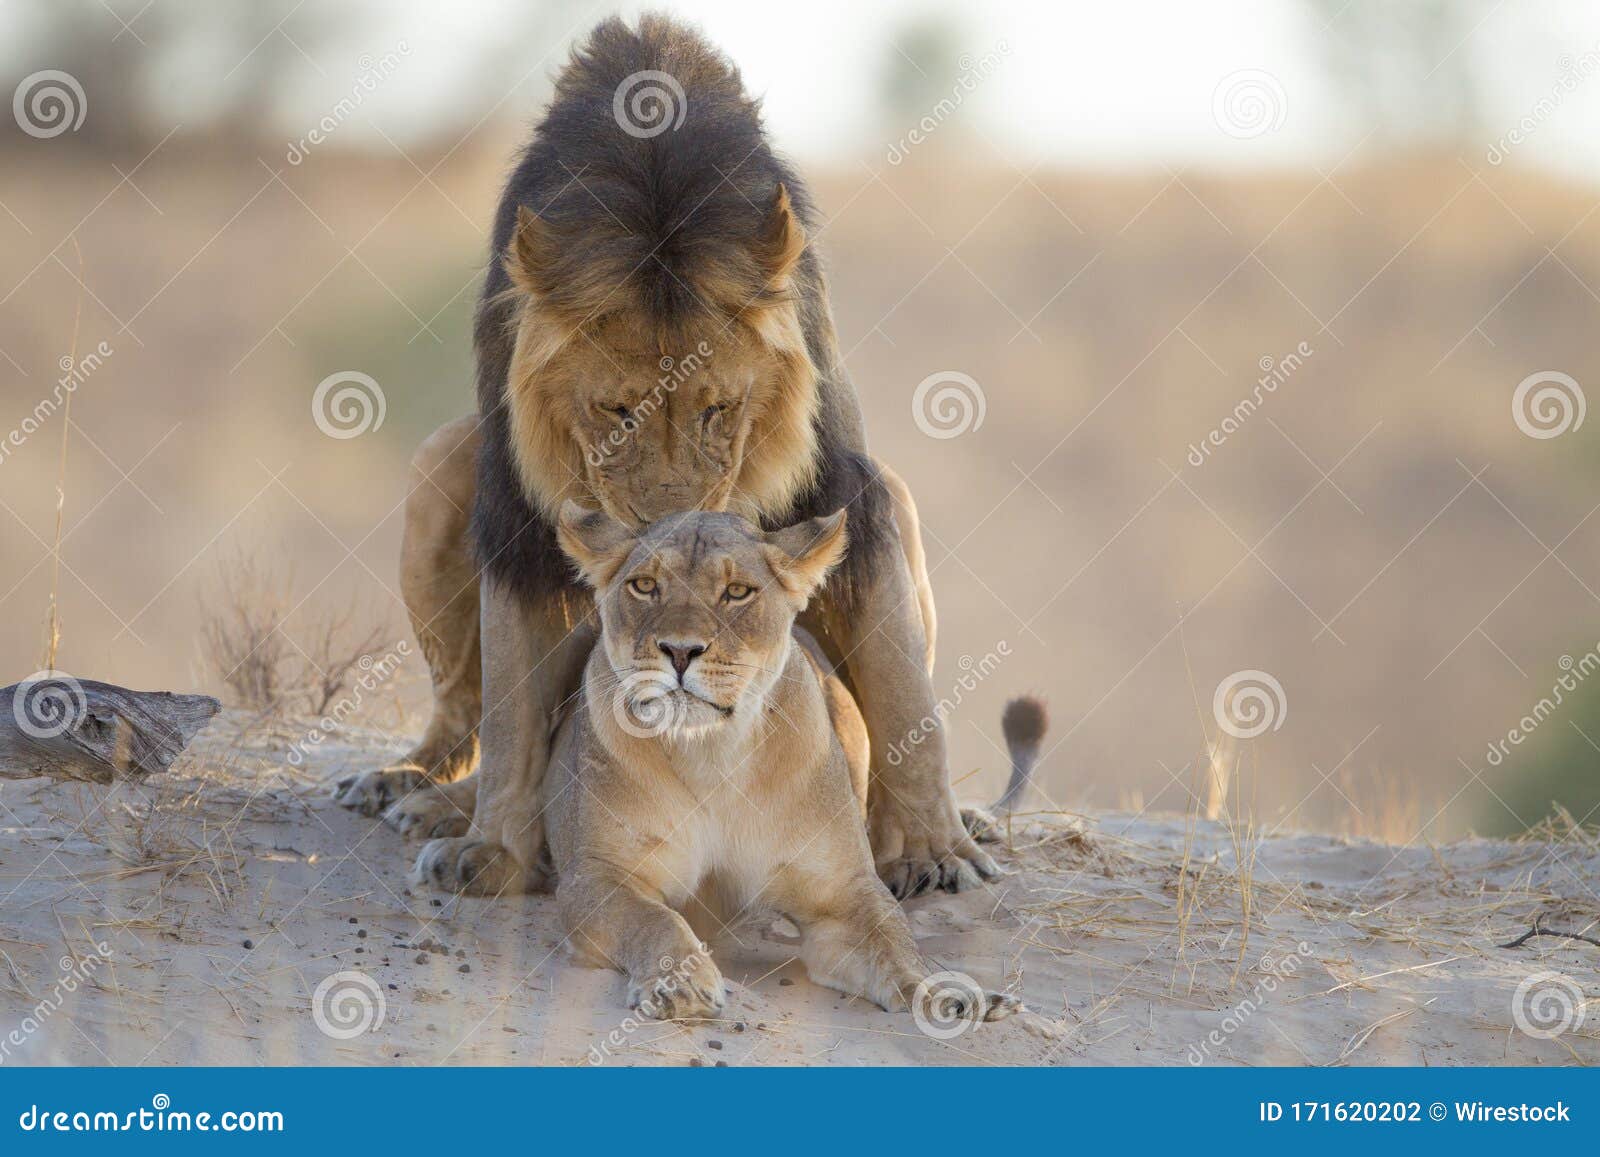 Magnificent Lion and a Beautiful Lioness Mating on a Hill in the Middle of  the Desert Stock Photo - Image of hill, animal: 171620202